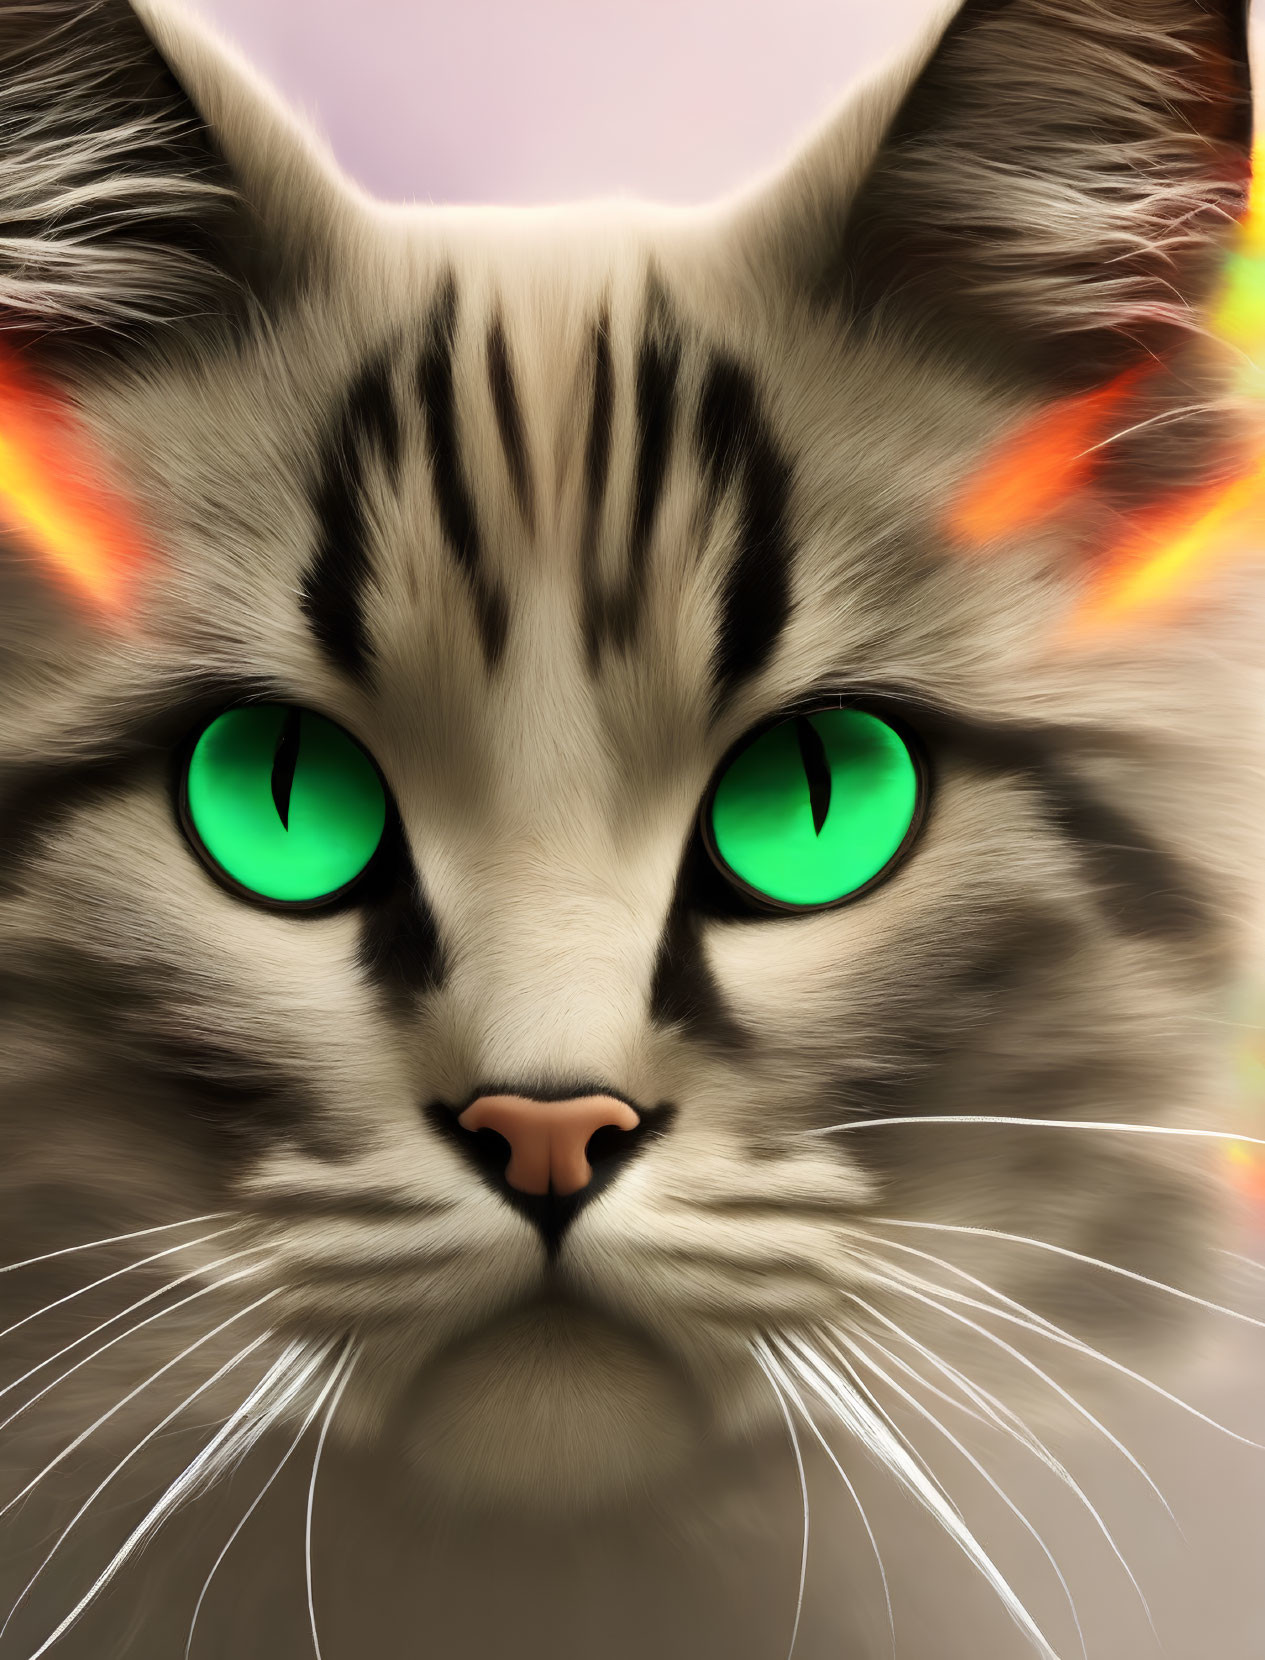 Detailed Close-Up Digital Artwork: Cat with Green Eyes and Tabby Markings